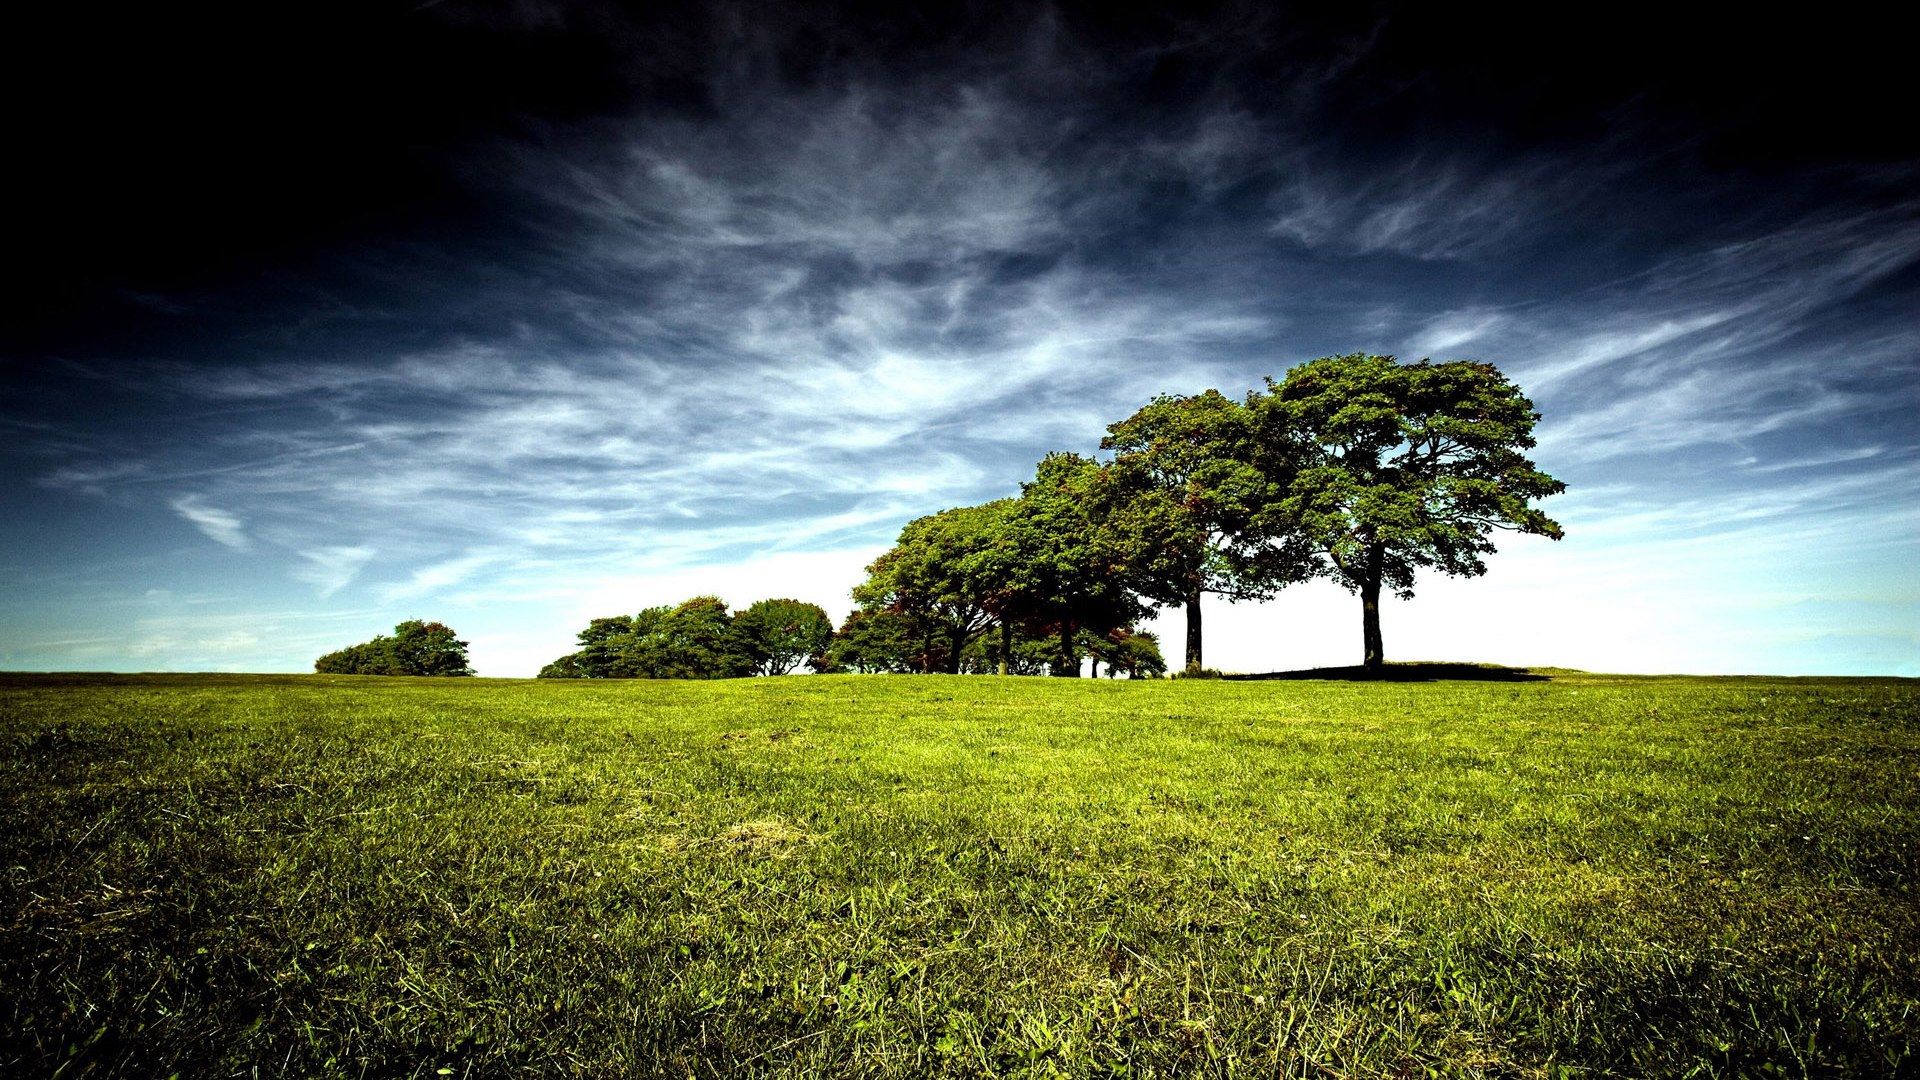 1920x1080px Amazing Wallpapers Hd Trees In A Row | #288188